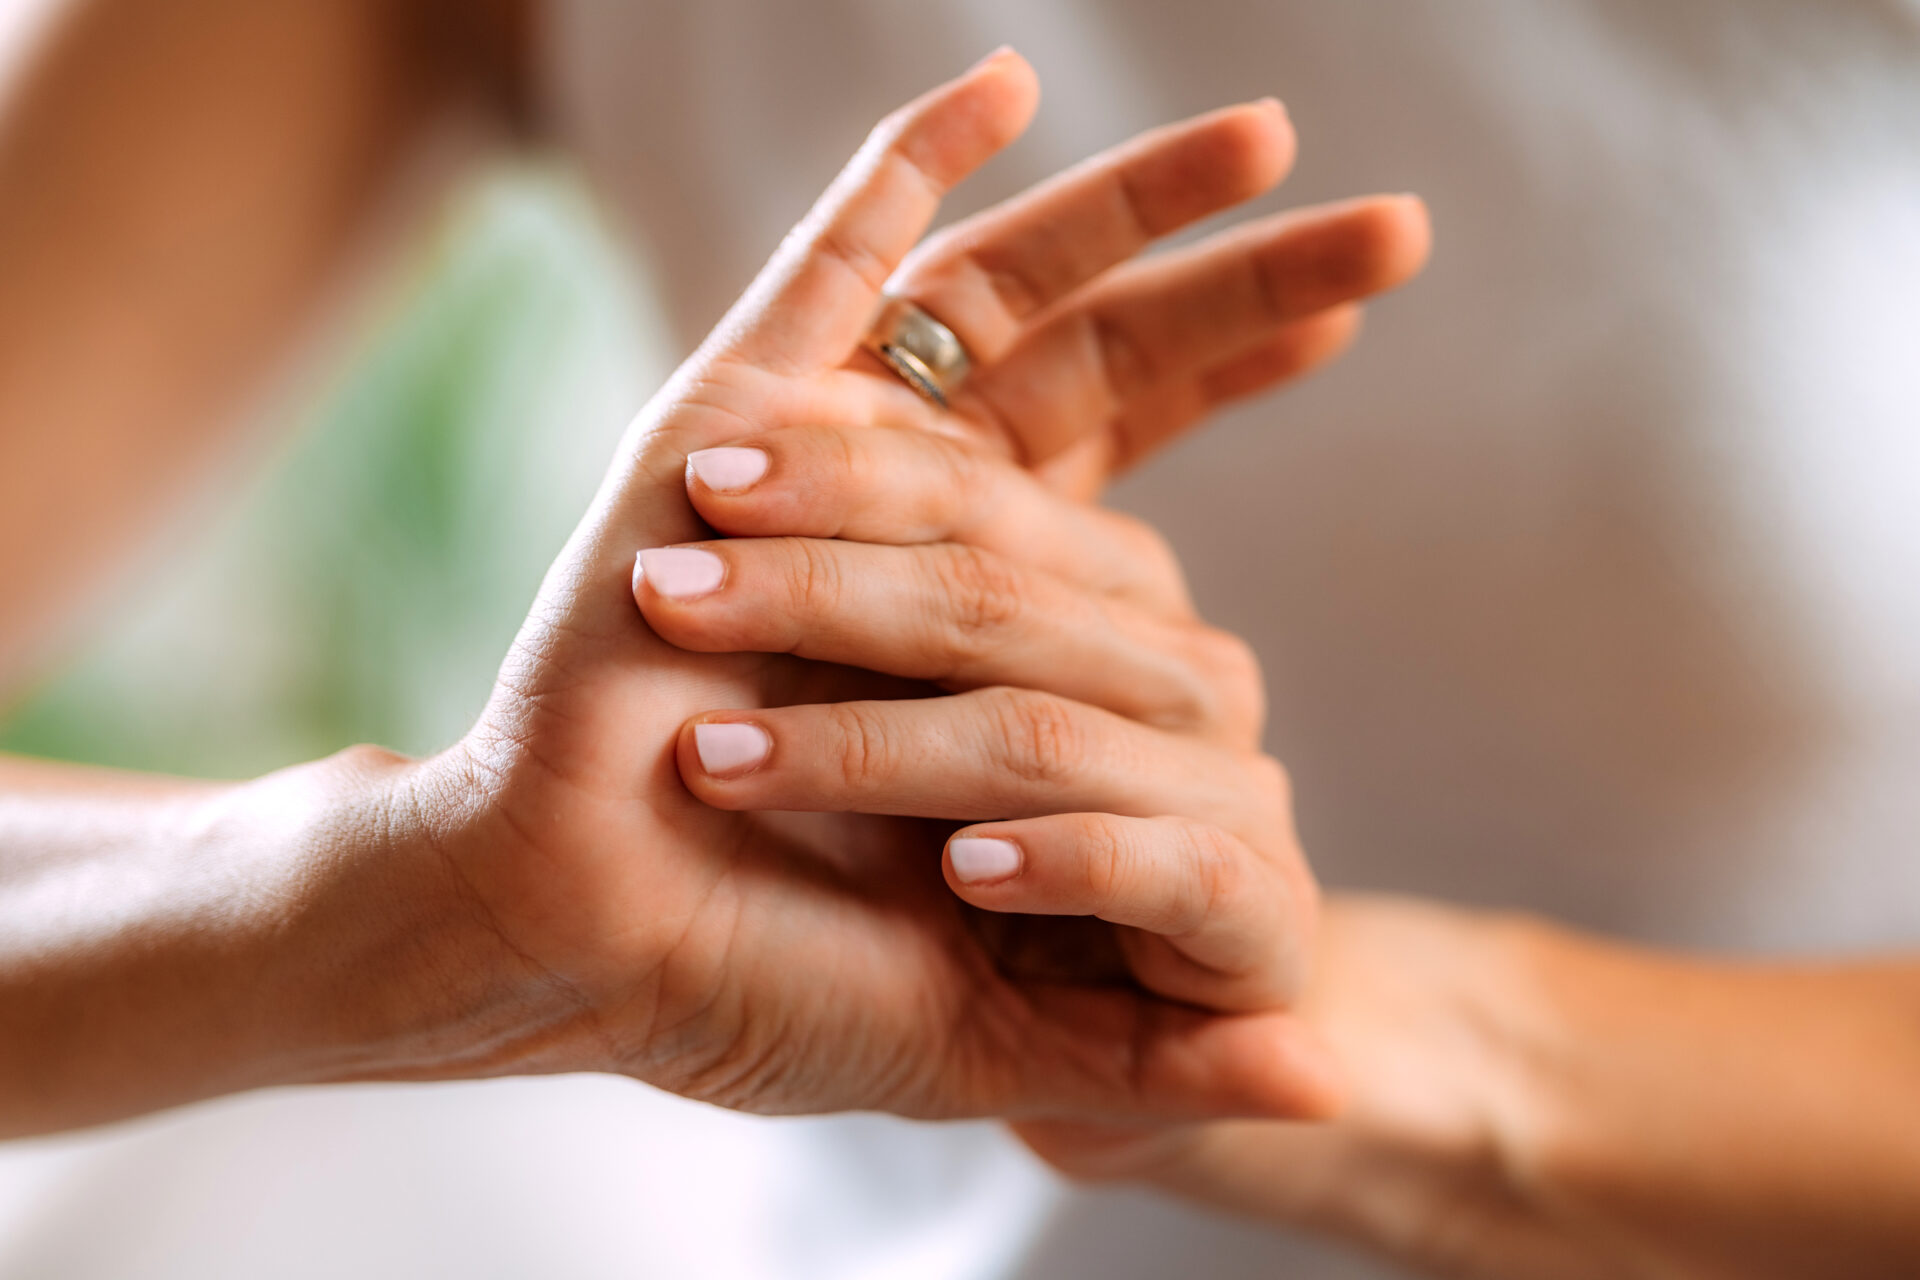 unrecognizable female rubbing hands together gently as if from pain